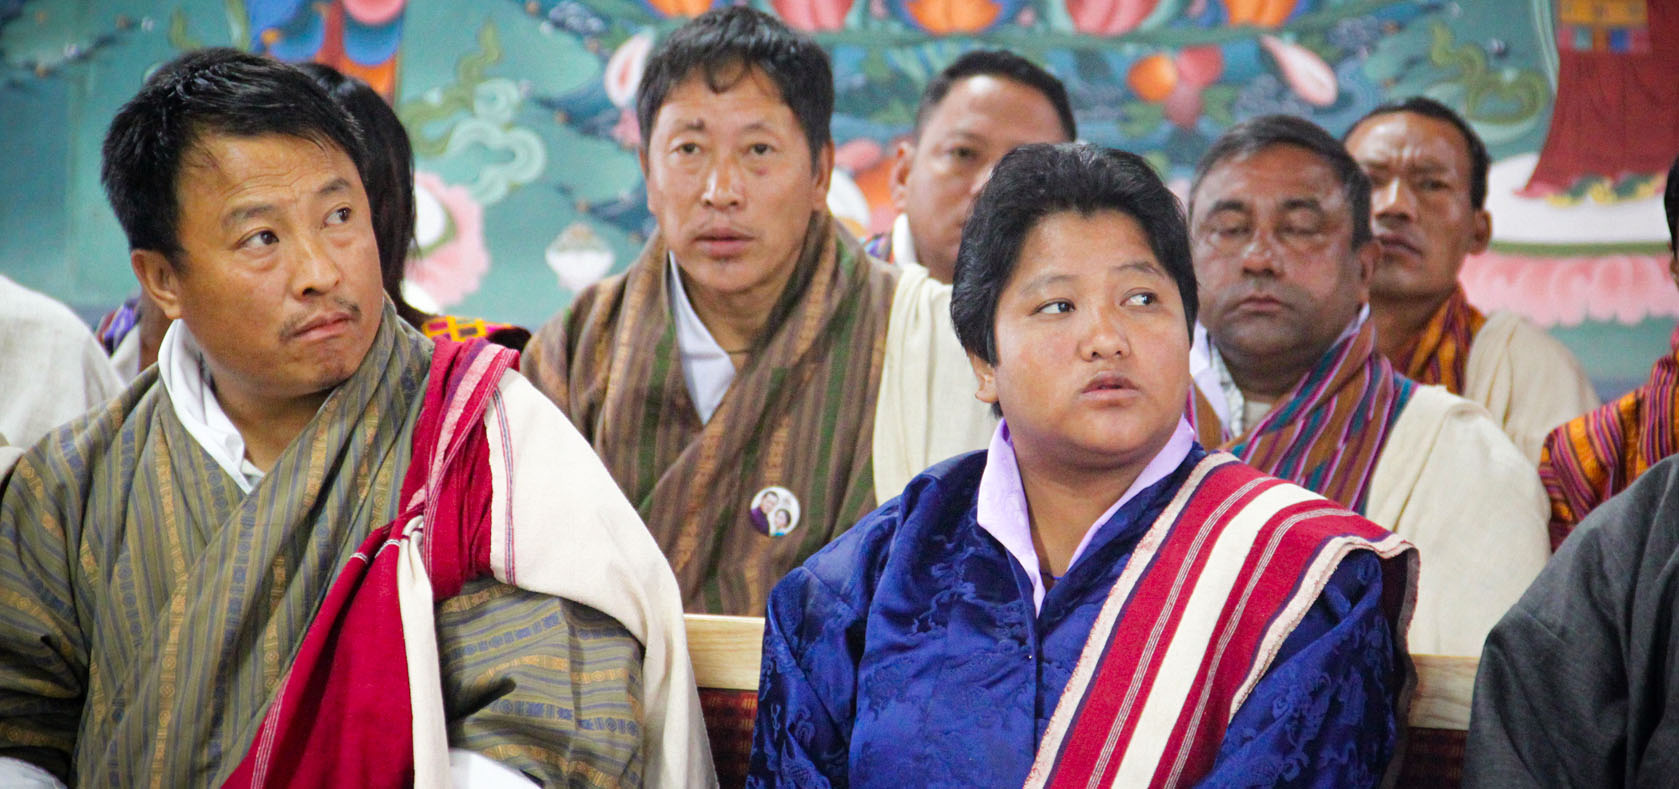 Namgay Peldon, aged 28, is the Gup of Tashiding Gewog located in Dagana Dzongkhag of Bhutan. She currently stands as the only female Gup or locally elected leader in Bhutan. Gewogs are official administrative units in Bhutan, each headed by a Gup. Photo: UN Women/Gurpreet Singh